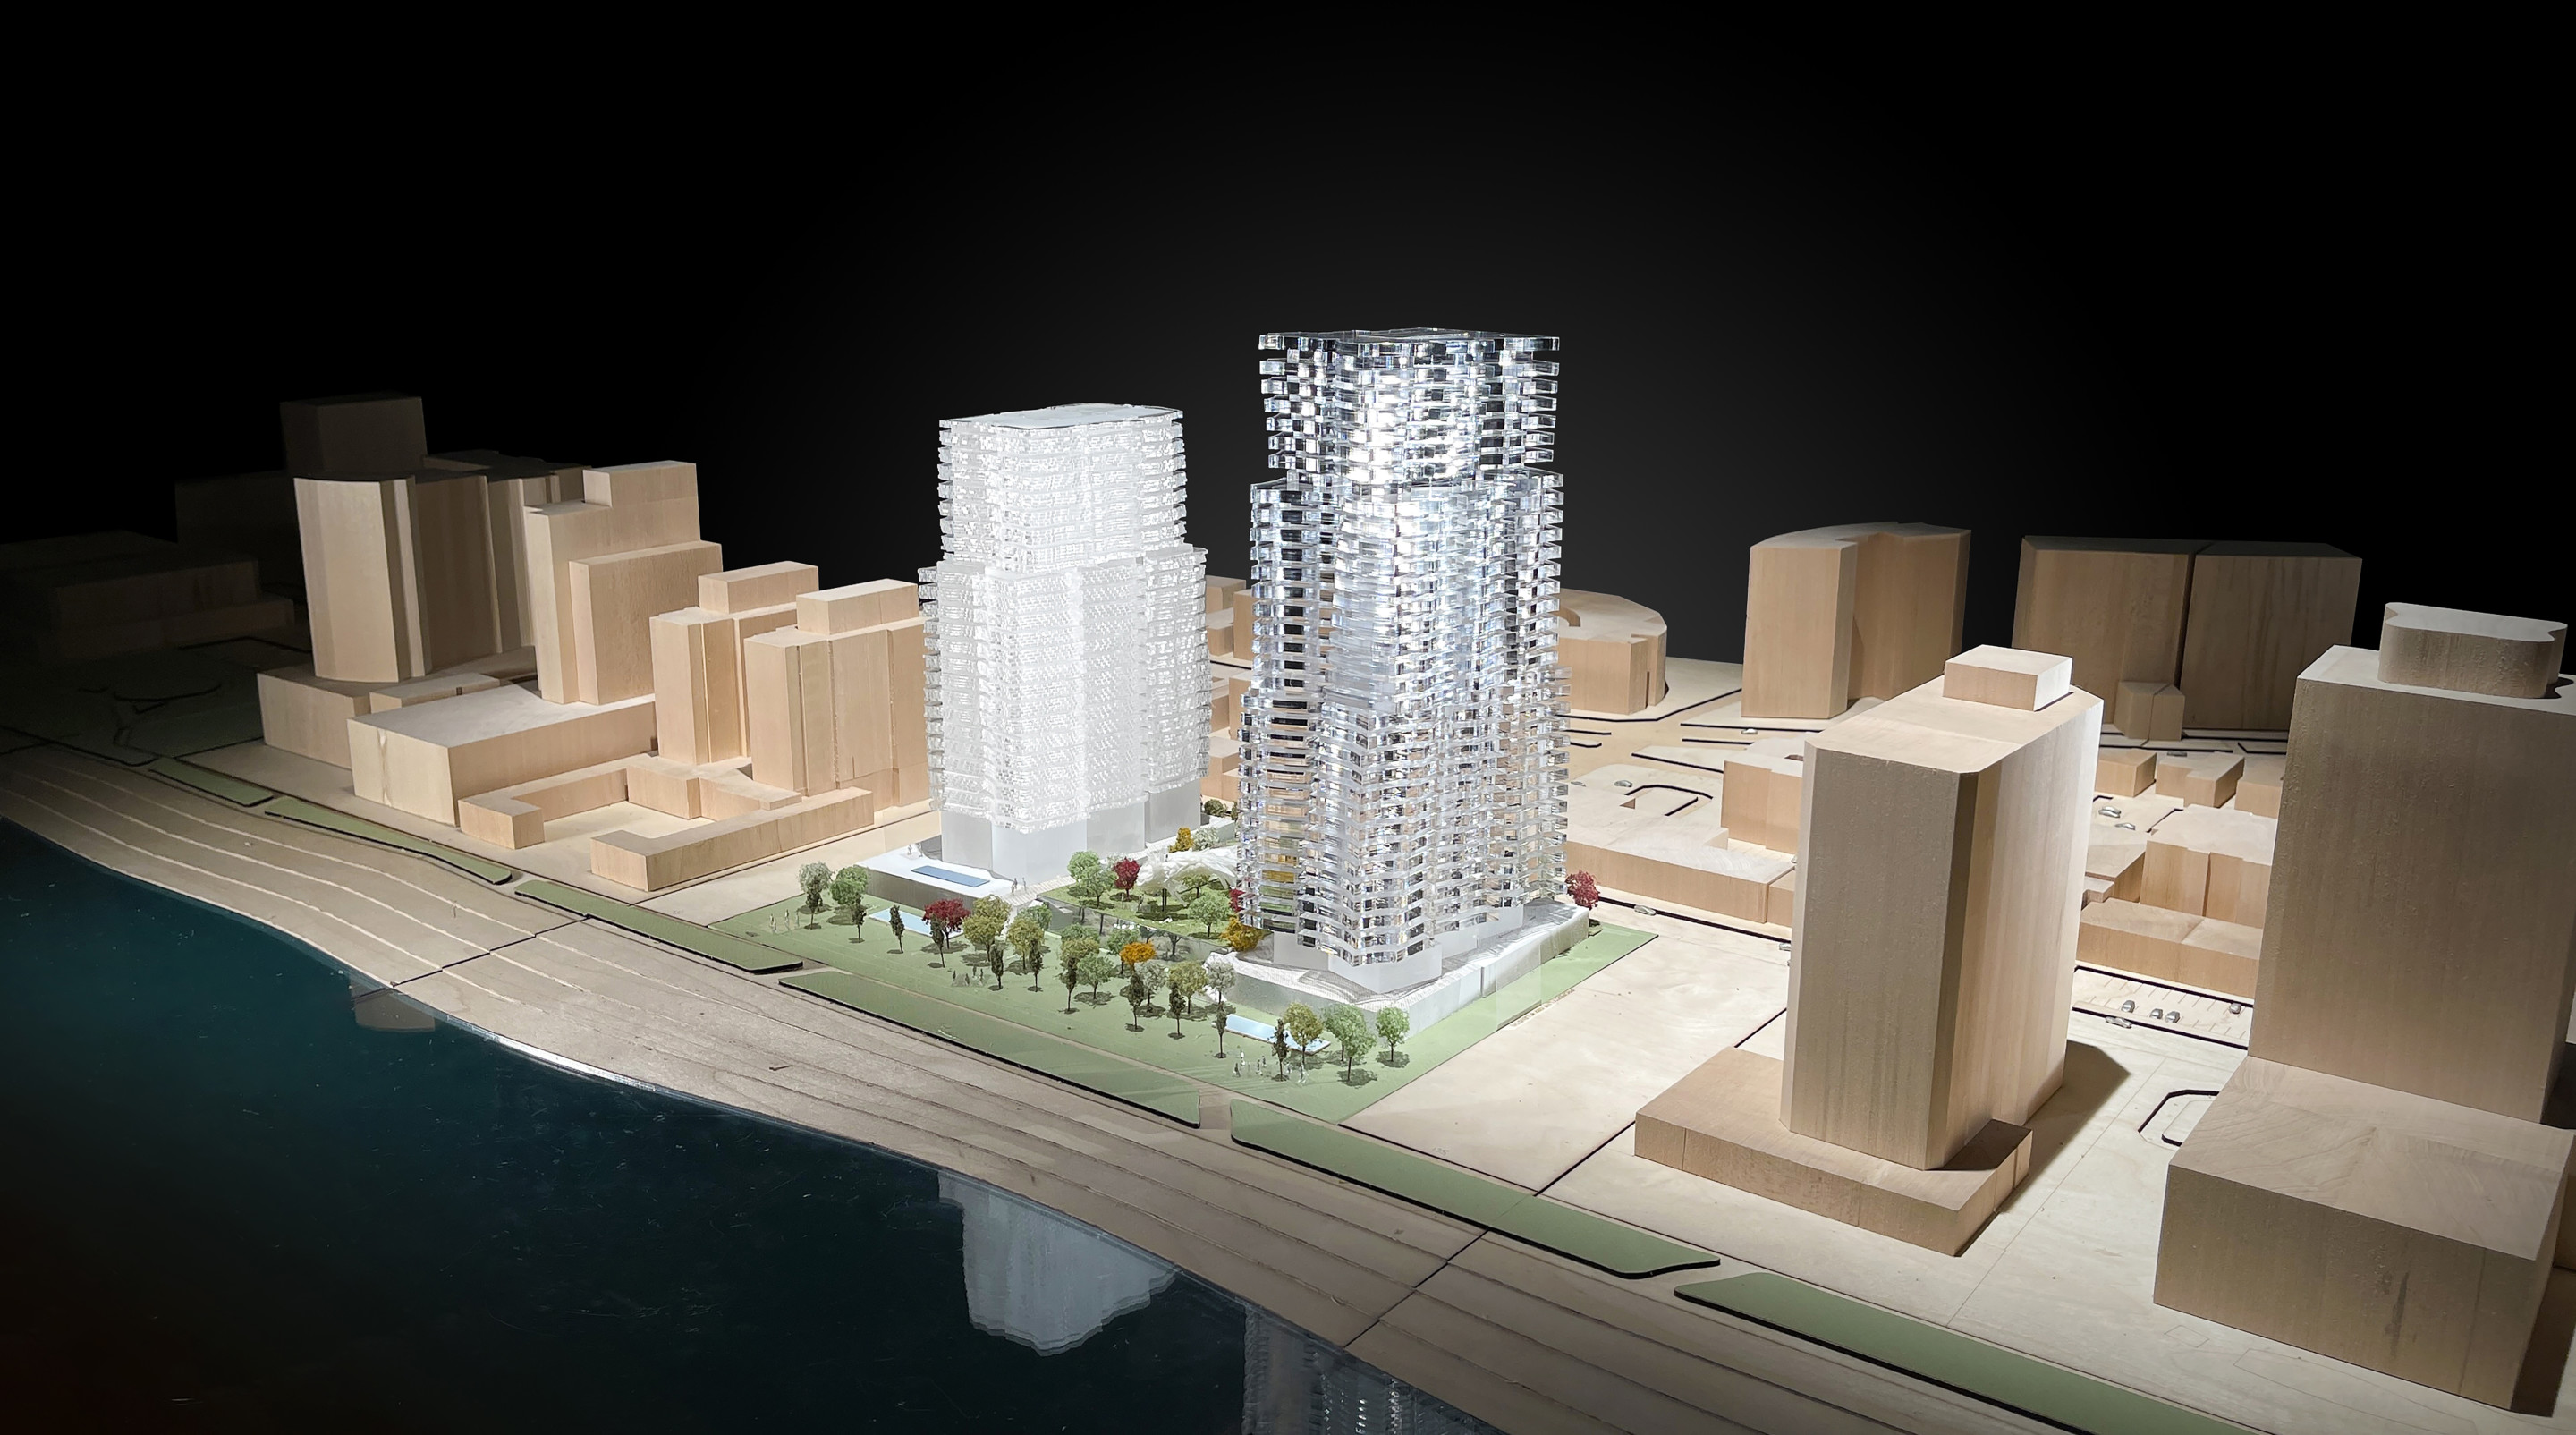 The redevelopment of the historic Gehry-designed Deauville Hotel is up for a vote